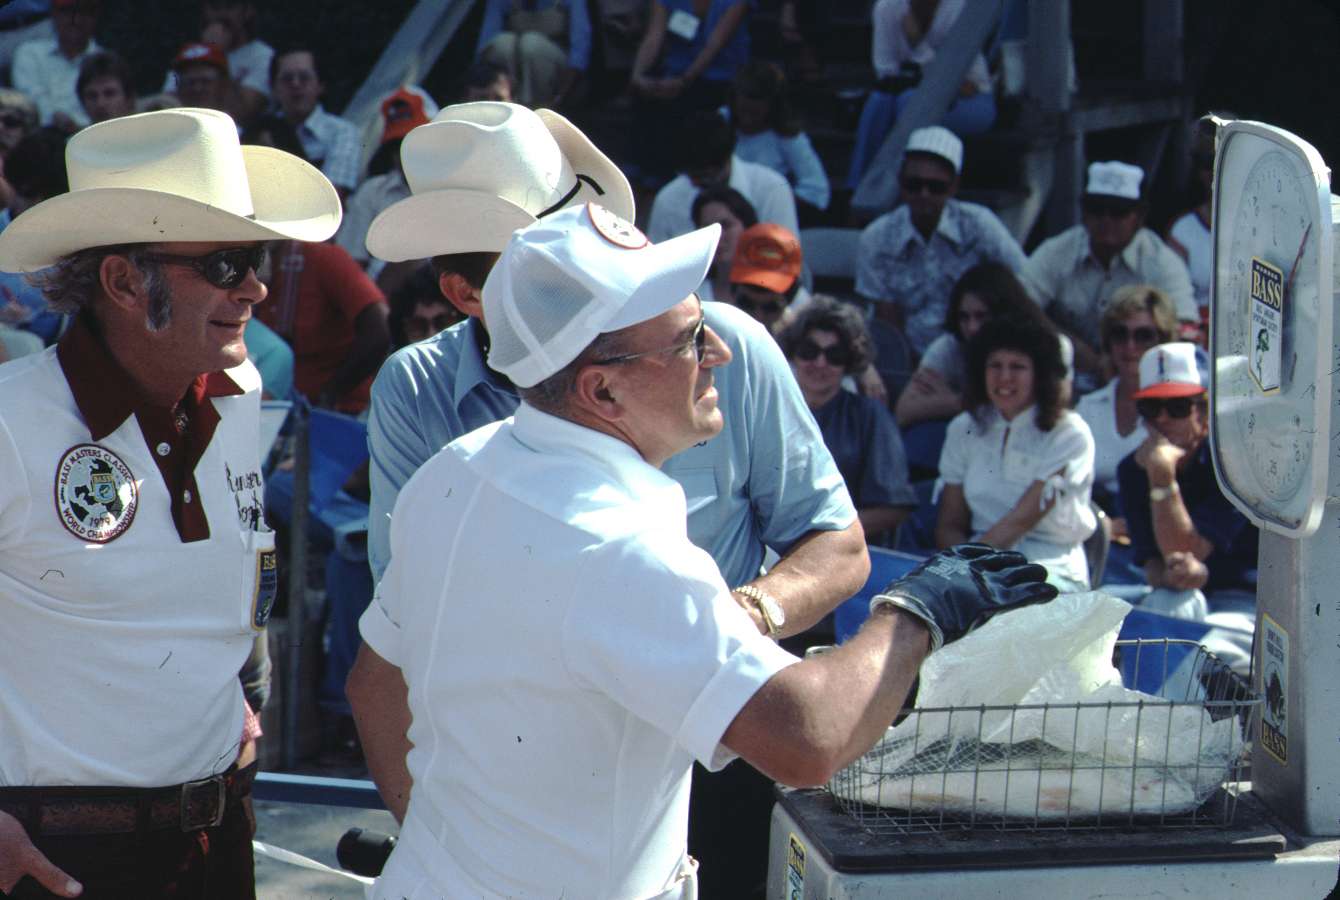 Wood won the 1979 New York Invitational on the St. Lawrence River with a weight of 47 pounds, 3 ounces. That win helped gain him a second berth in the Classic. Here, Wood weighs in at the Classic held on Lake Texoma, where he finished ninth. 